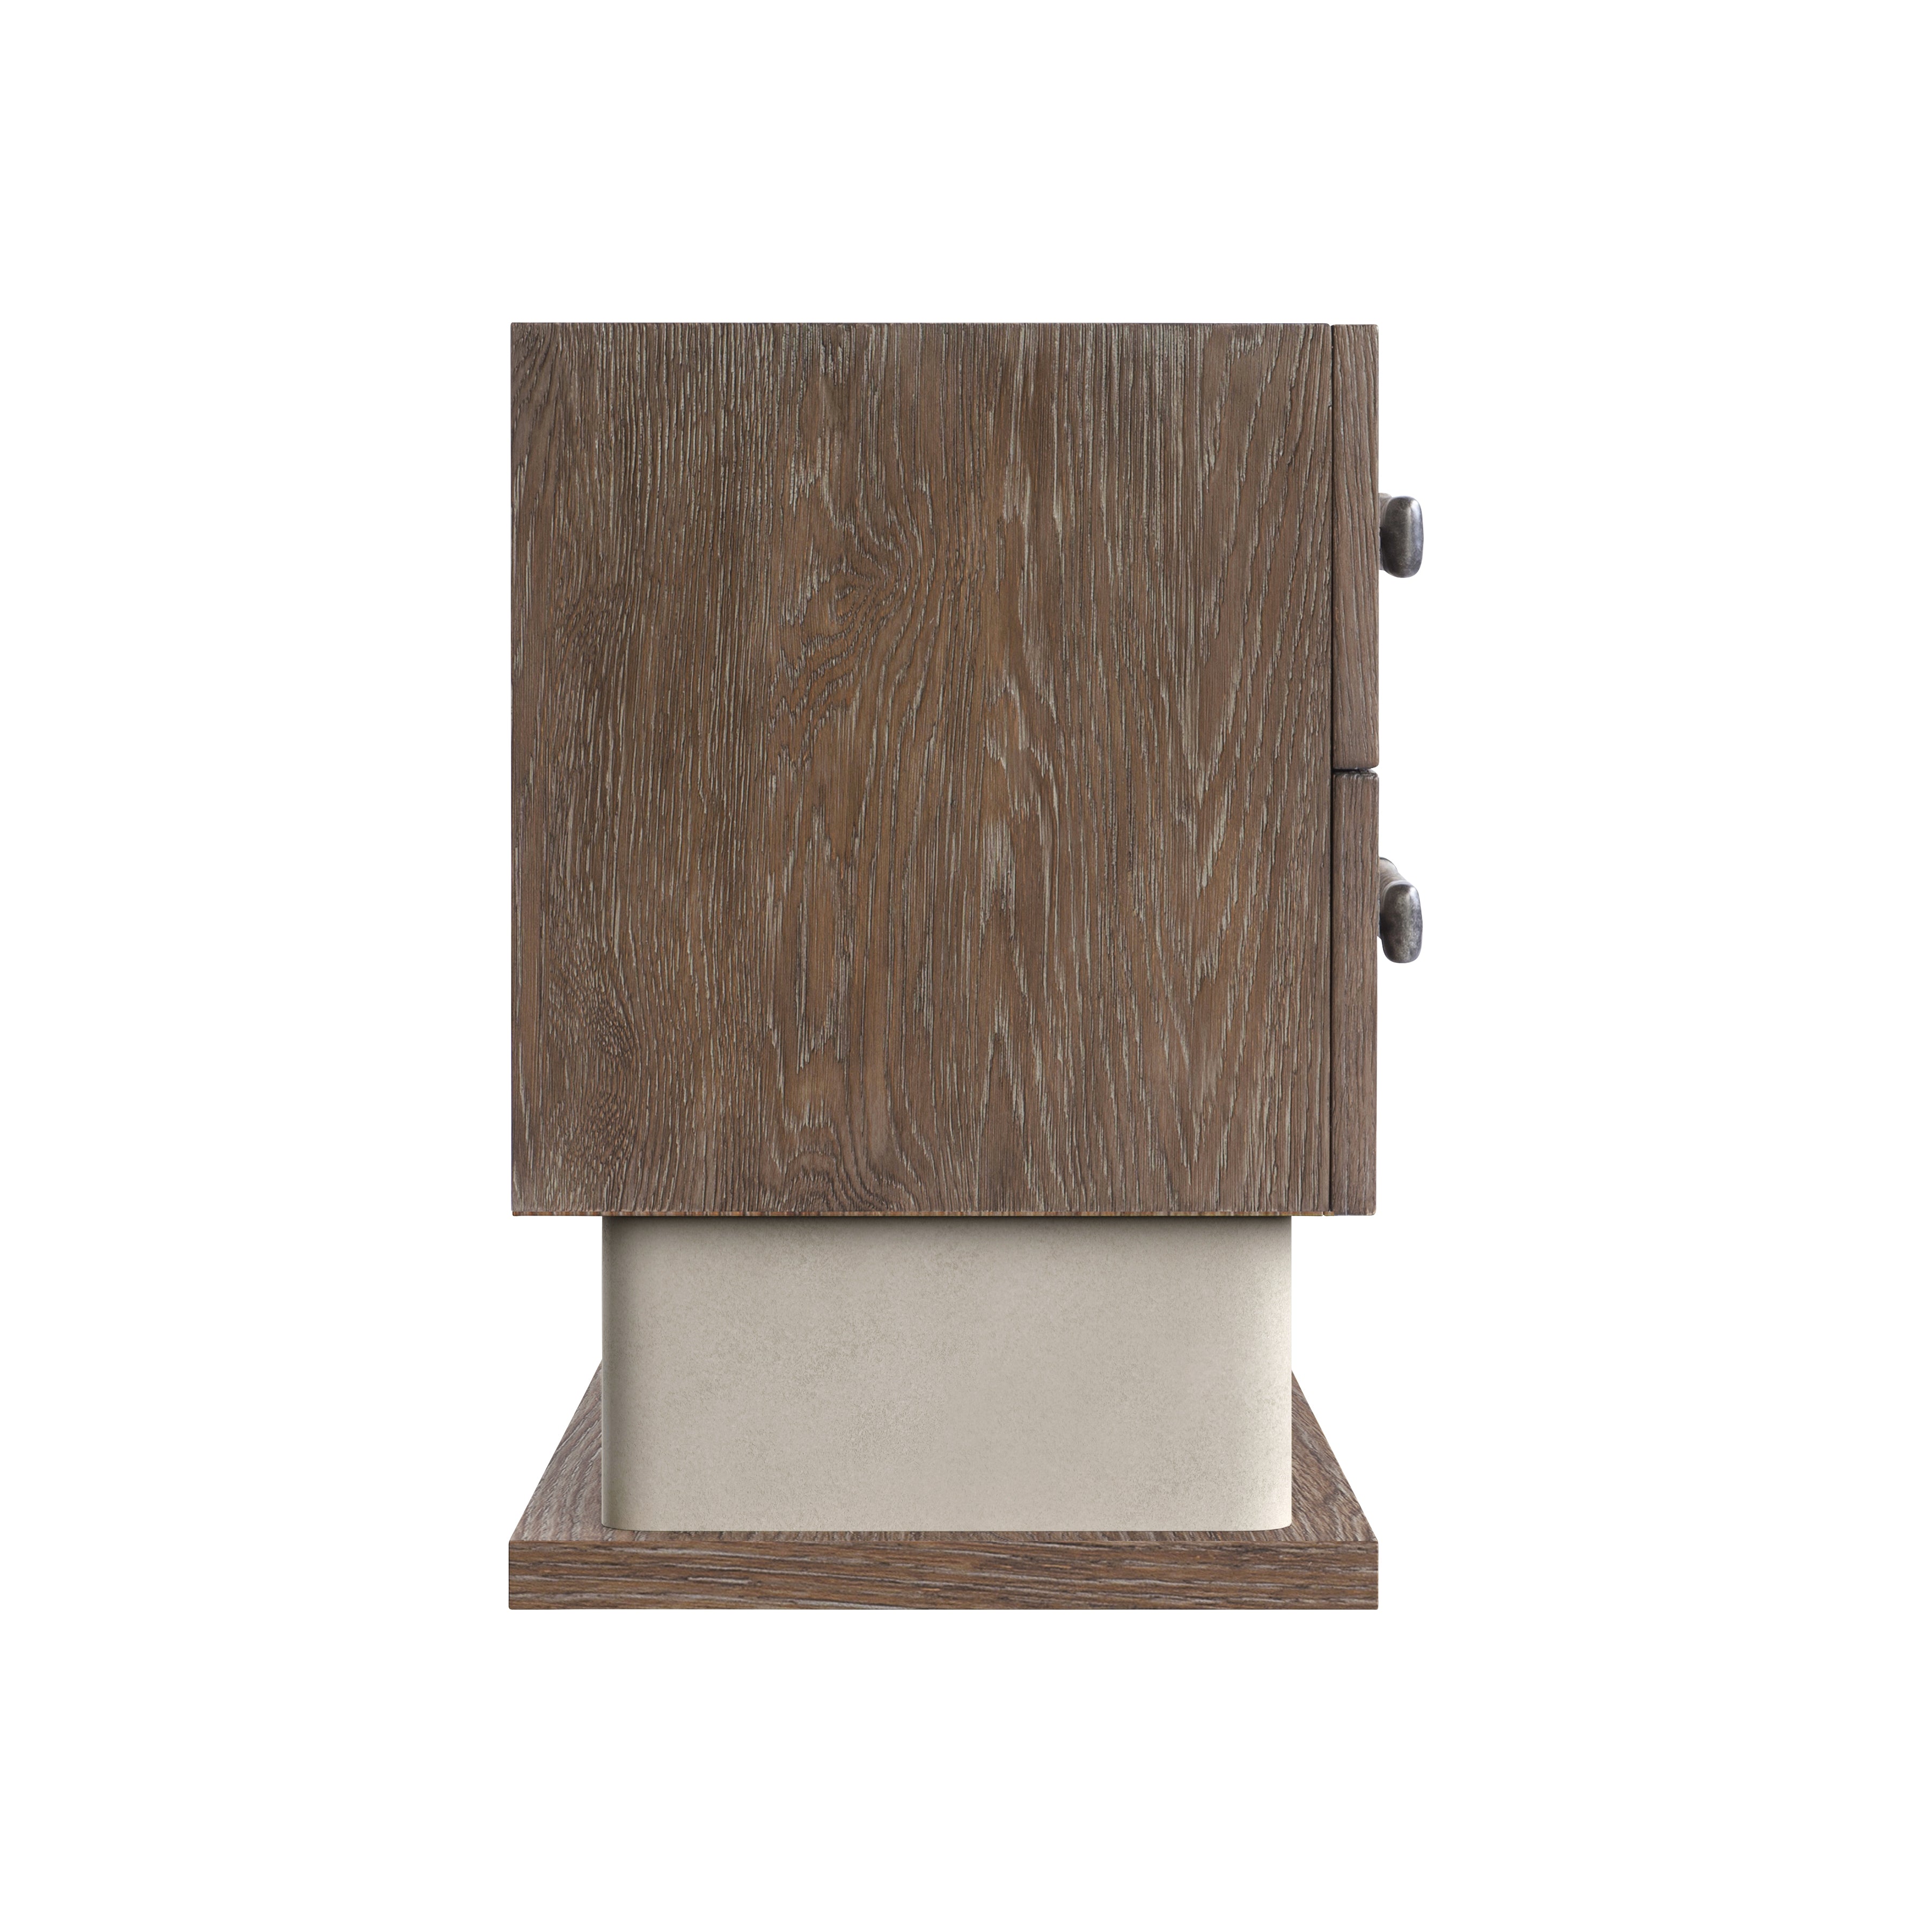 Casa Paros Nightstand with Panel Base